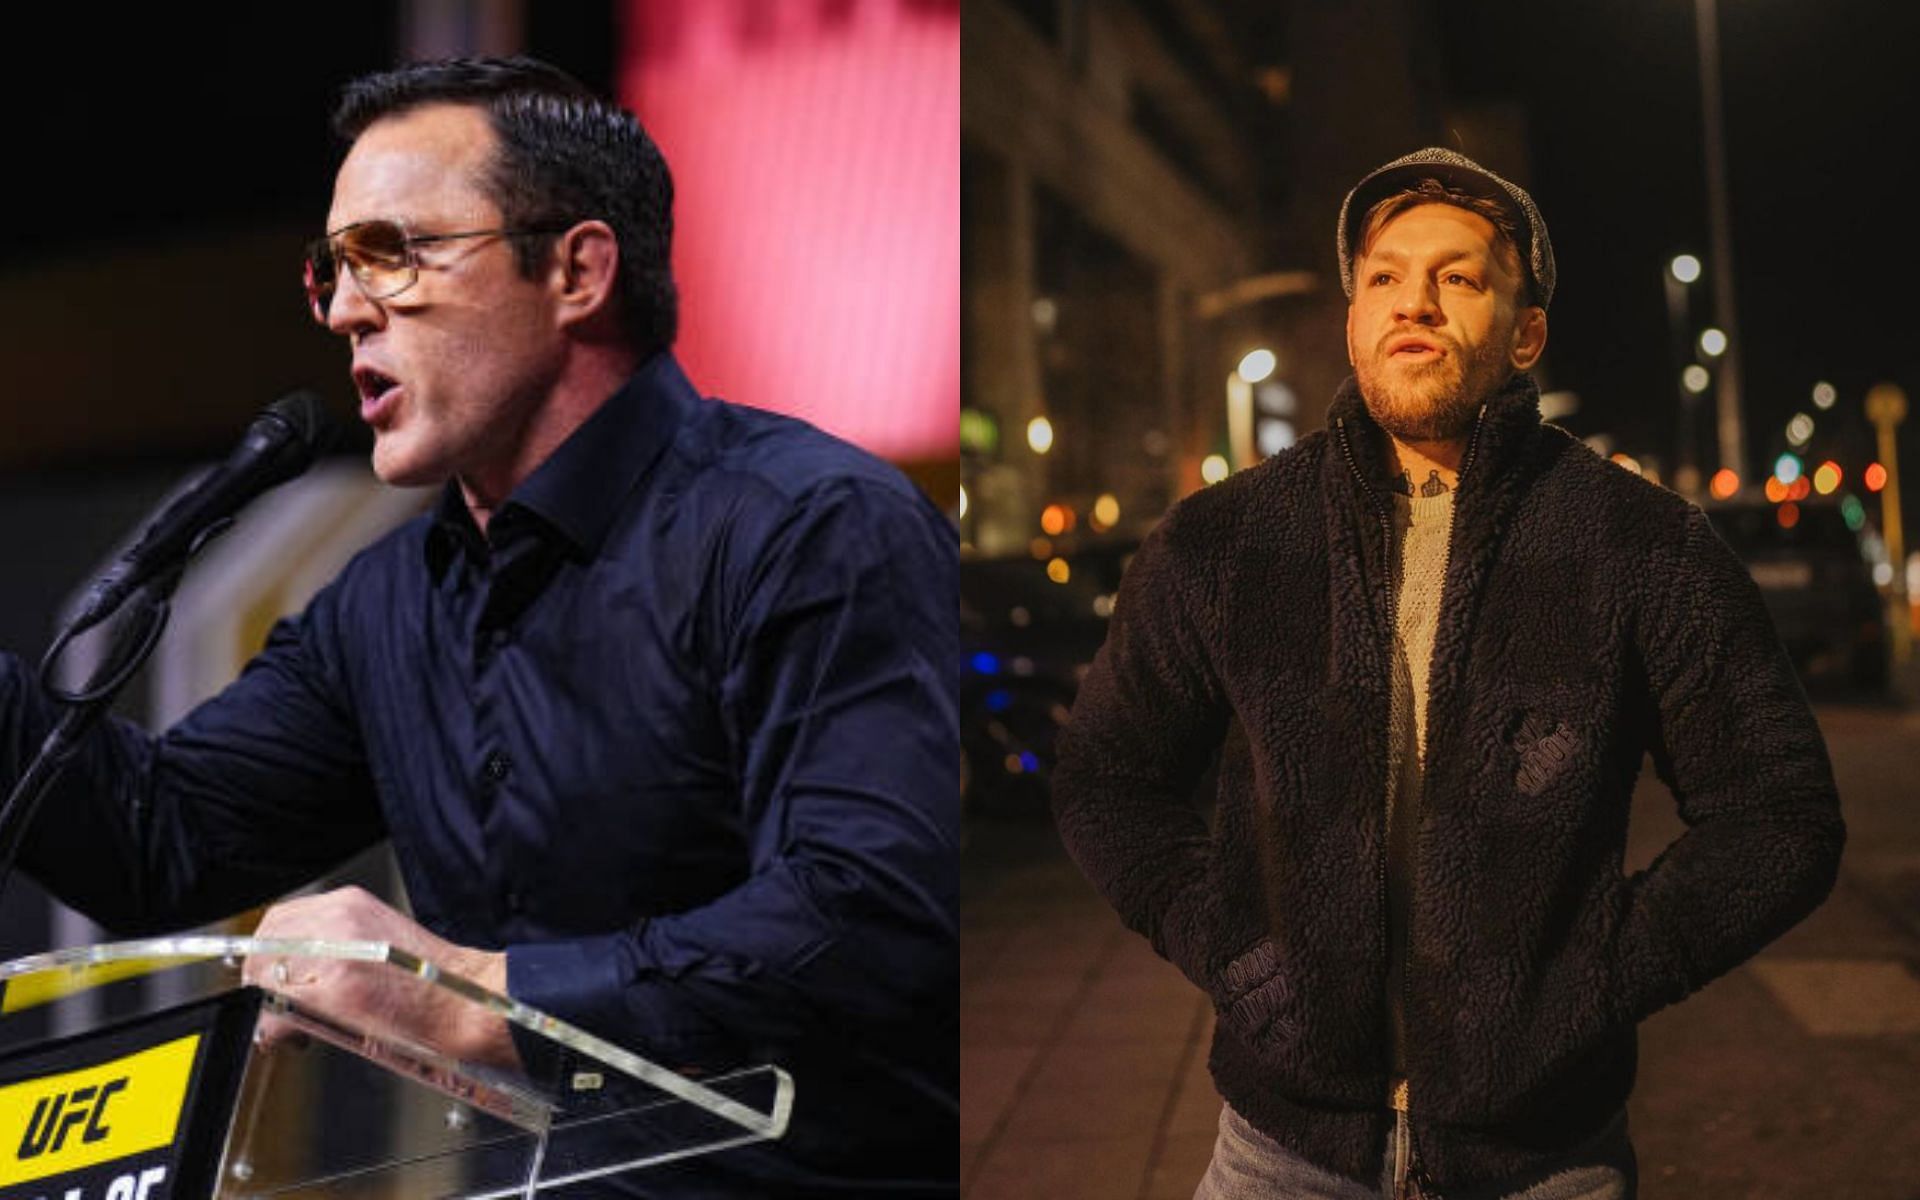 Conor McGregor (right) ridicules Chael Sonnen (left) for his UFC Hall of Fame ceremony attire. [Images courtesy: @thenotoriousmma on Instagram and Getty Images]